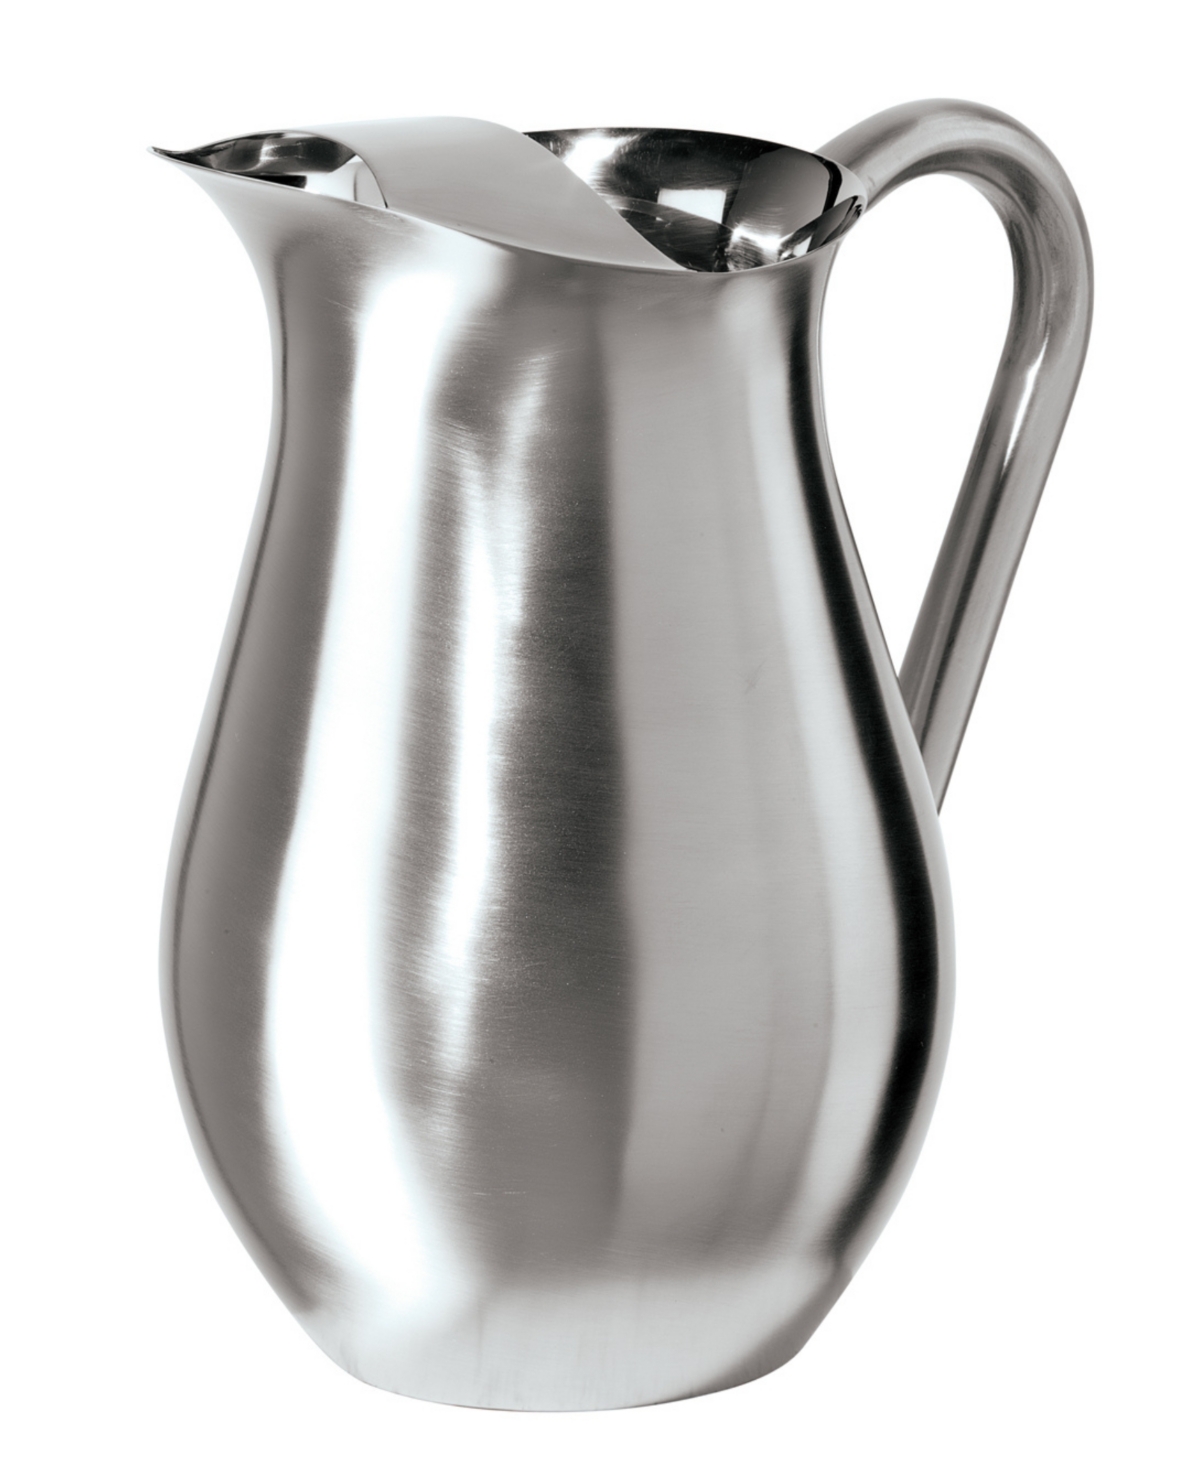 Oggi 2 Litre Pitcher In Stainless Steel